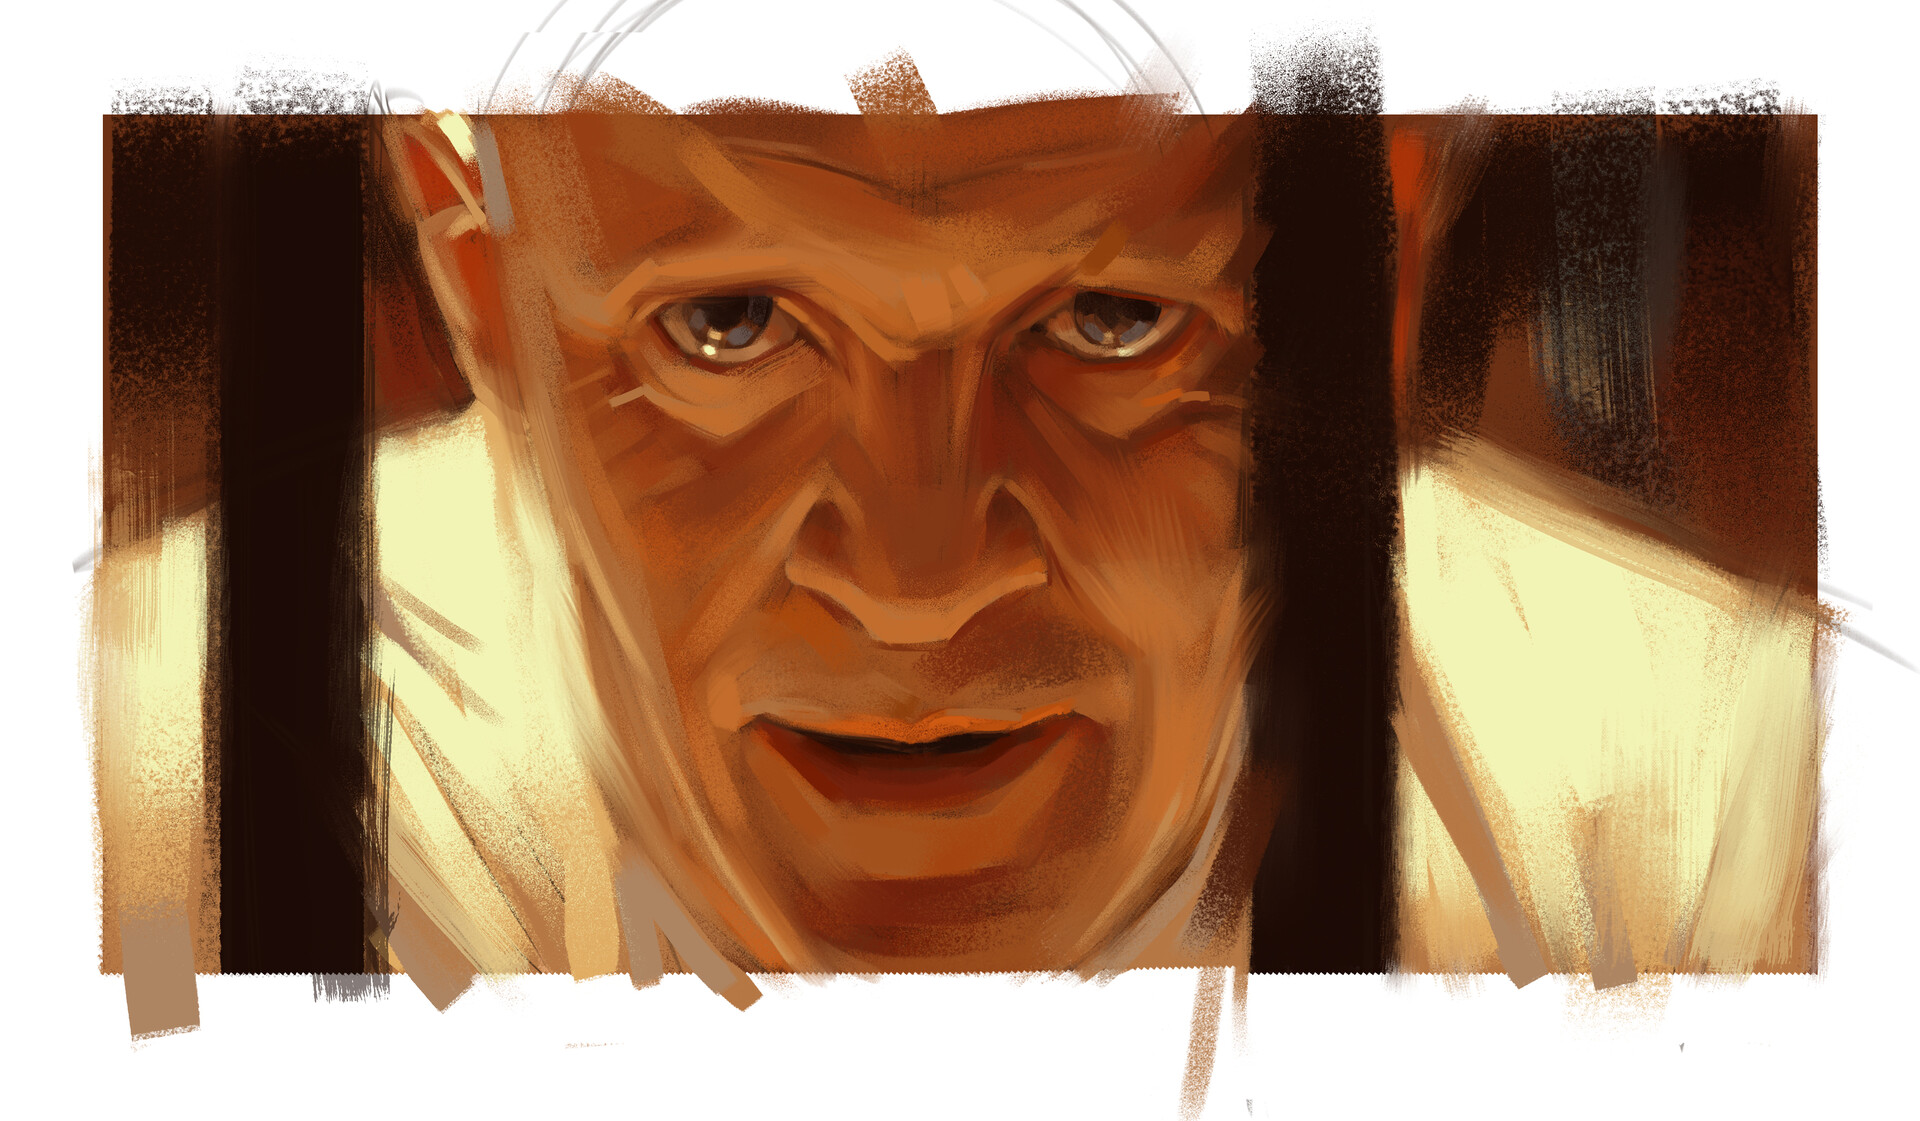 Anthony Hopkins Hannibal Lecter Artwork Face Men Portrait Movies The Silence Of The Lambs 1920x1121